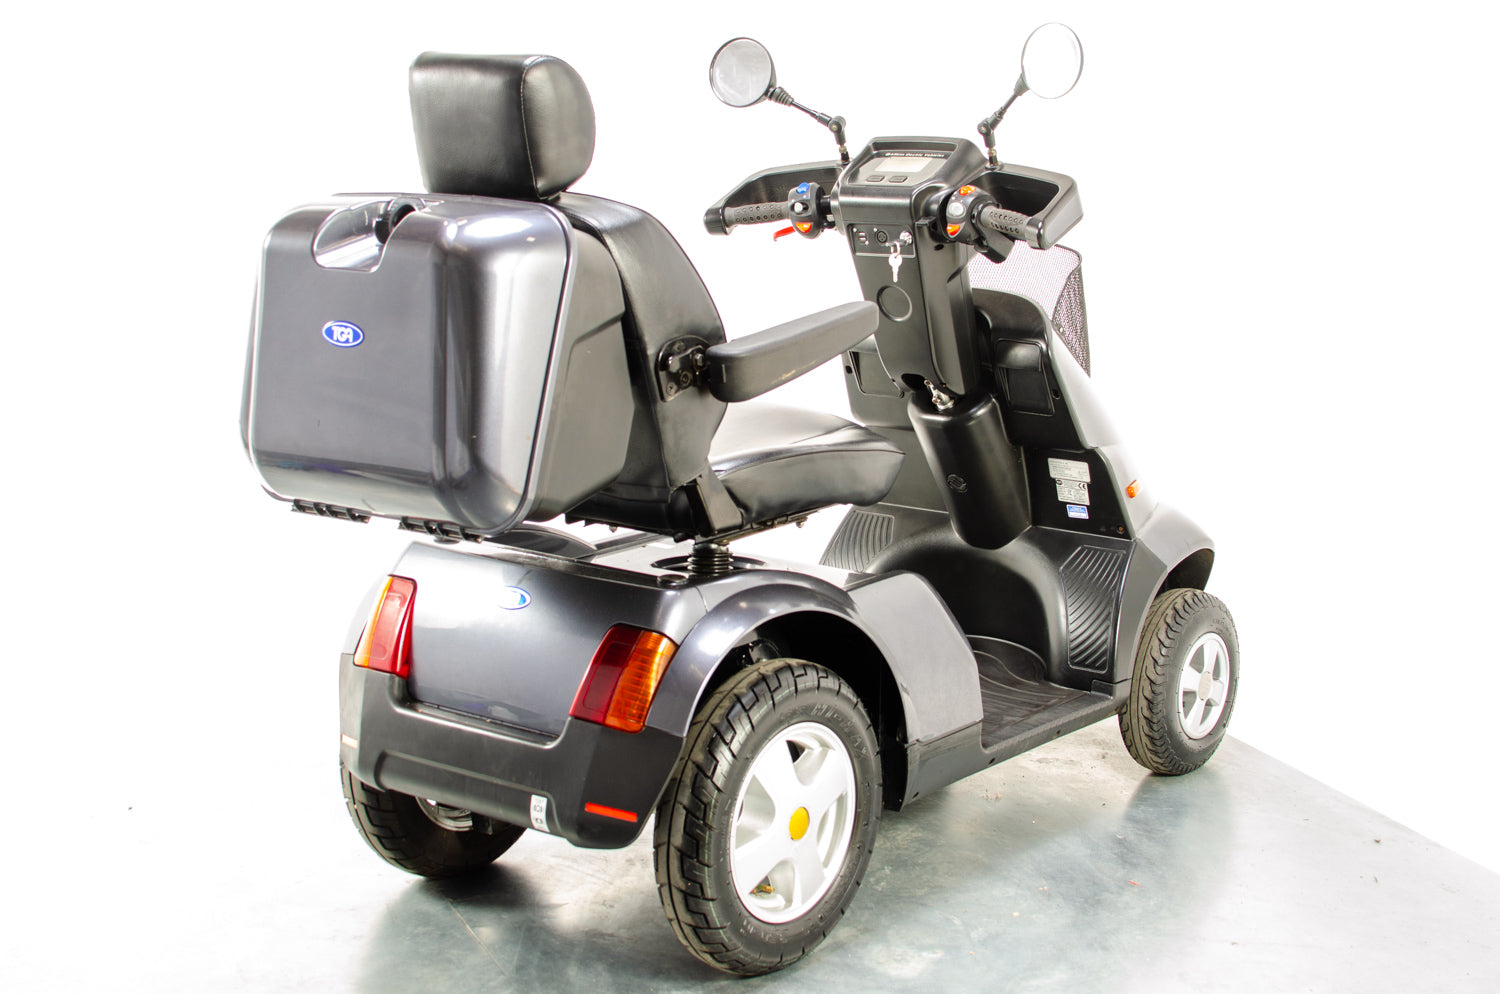 TGA Breeze S4 Used Mobility Scooter 8mph Large Road Legal All-Terrain Off-Road Grey